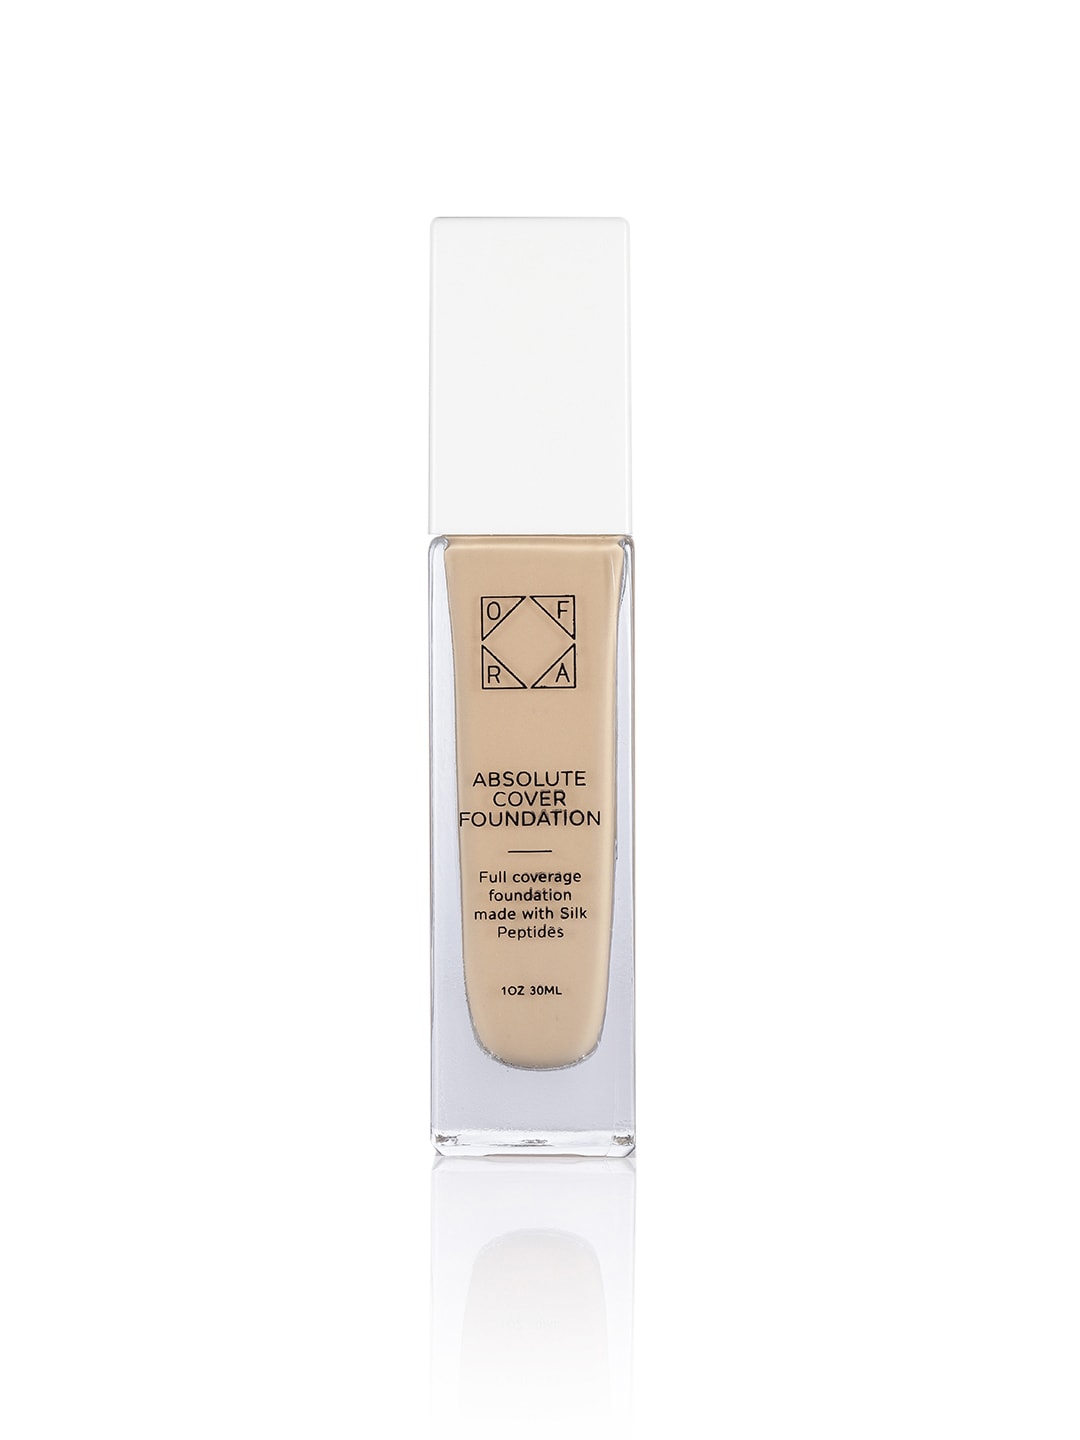 OFRA 4 Absolute Cover Silk Peptide Foundation 30ml Price in India